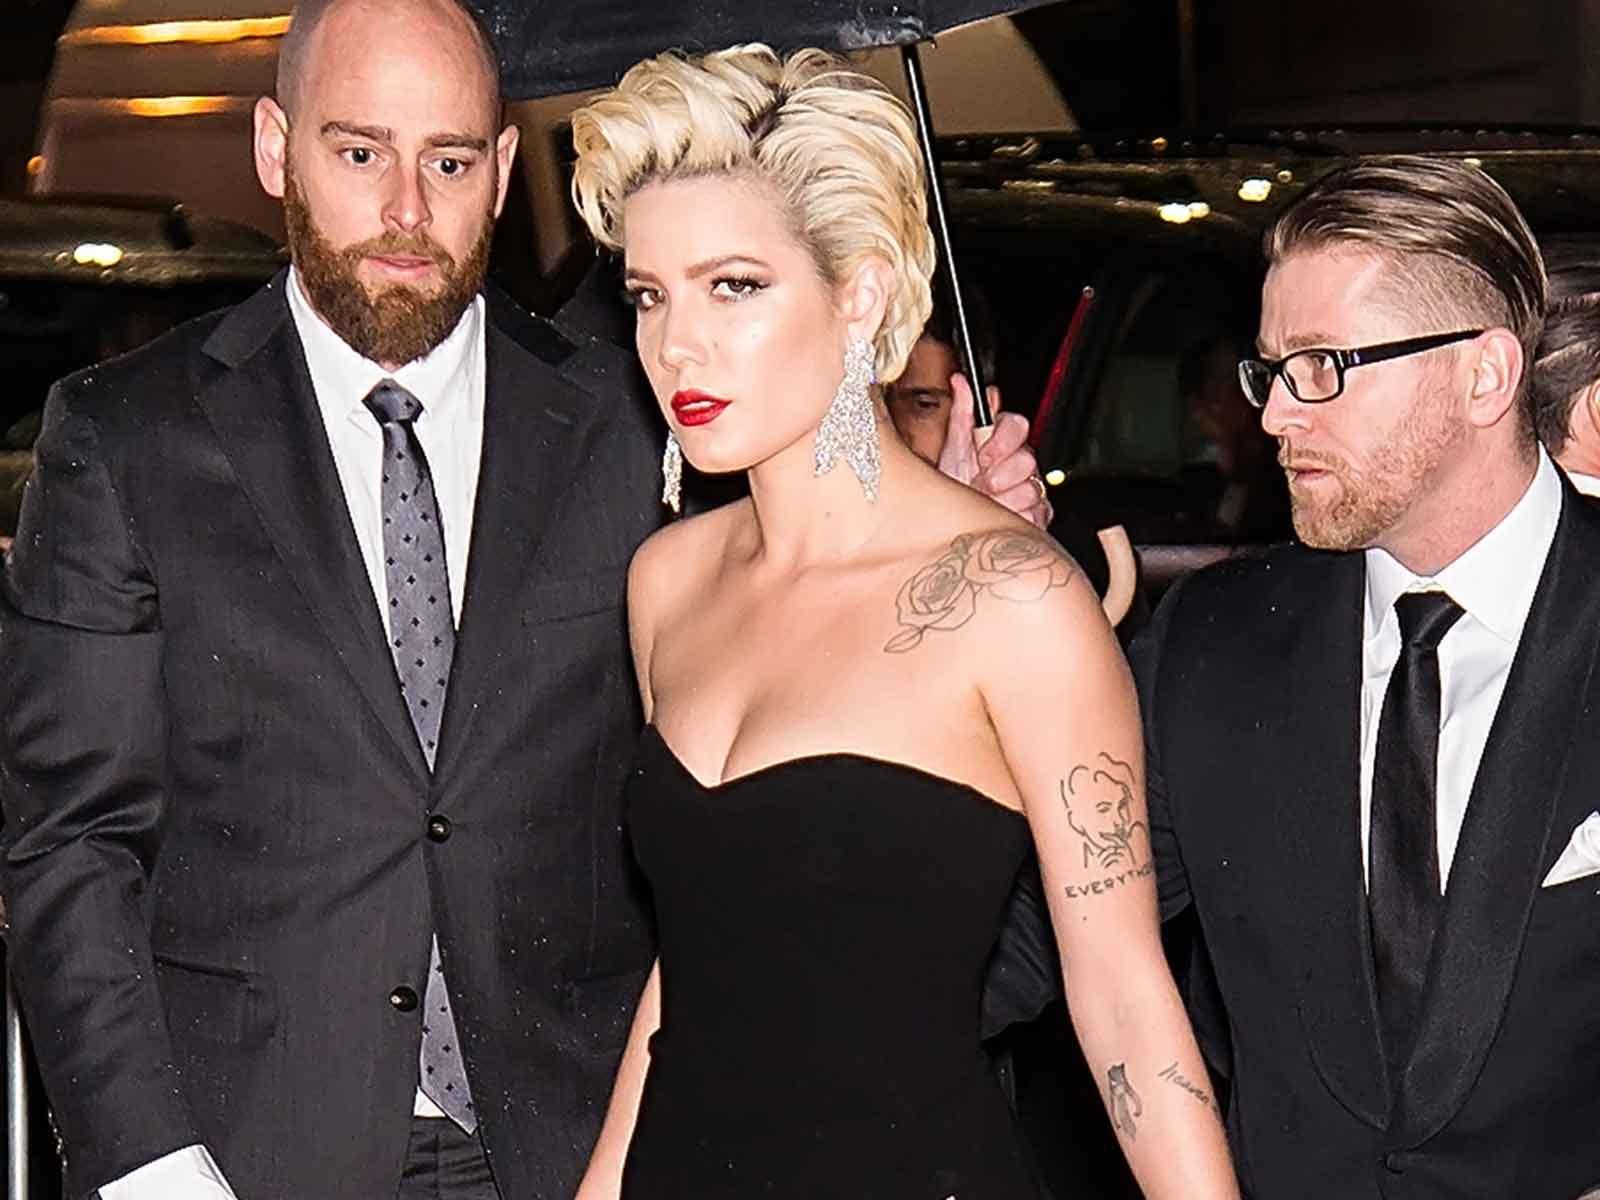 Eek! Some Guy Accidentally Made Halsey Show Her Undies on the Red Carpet